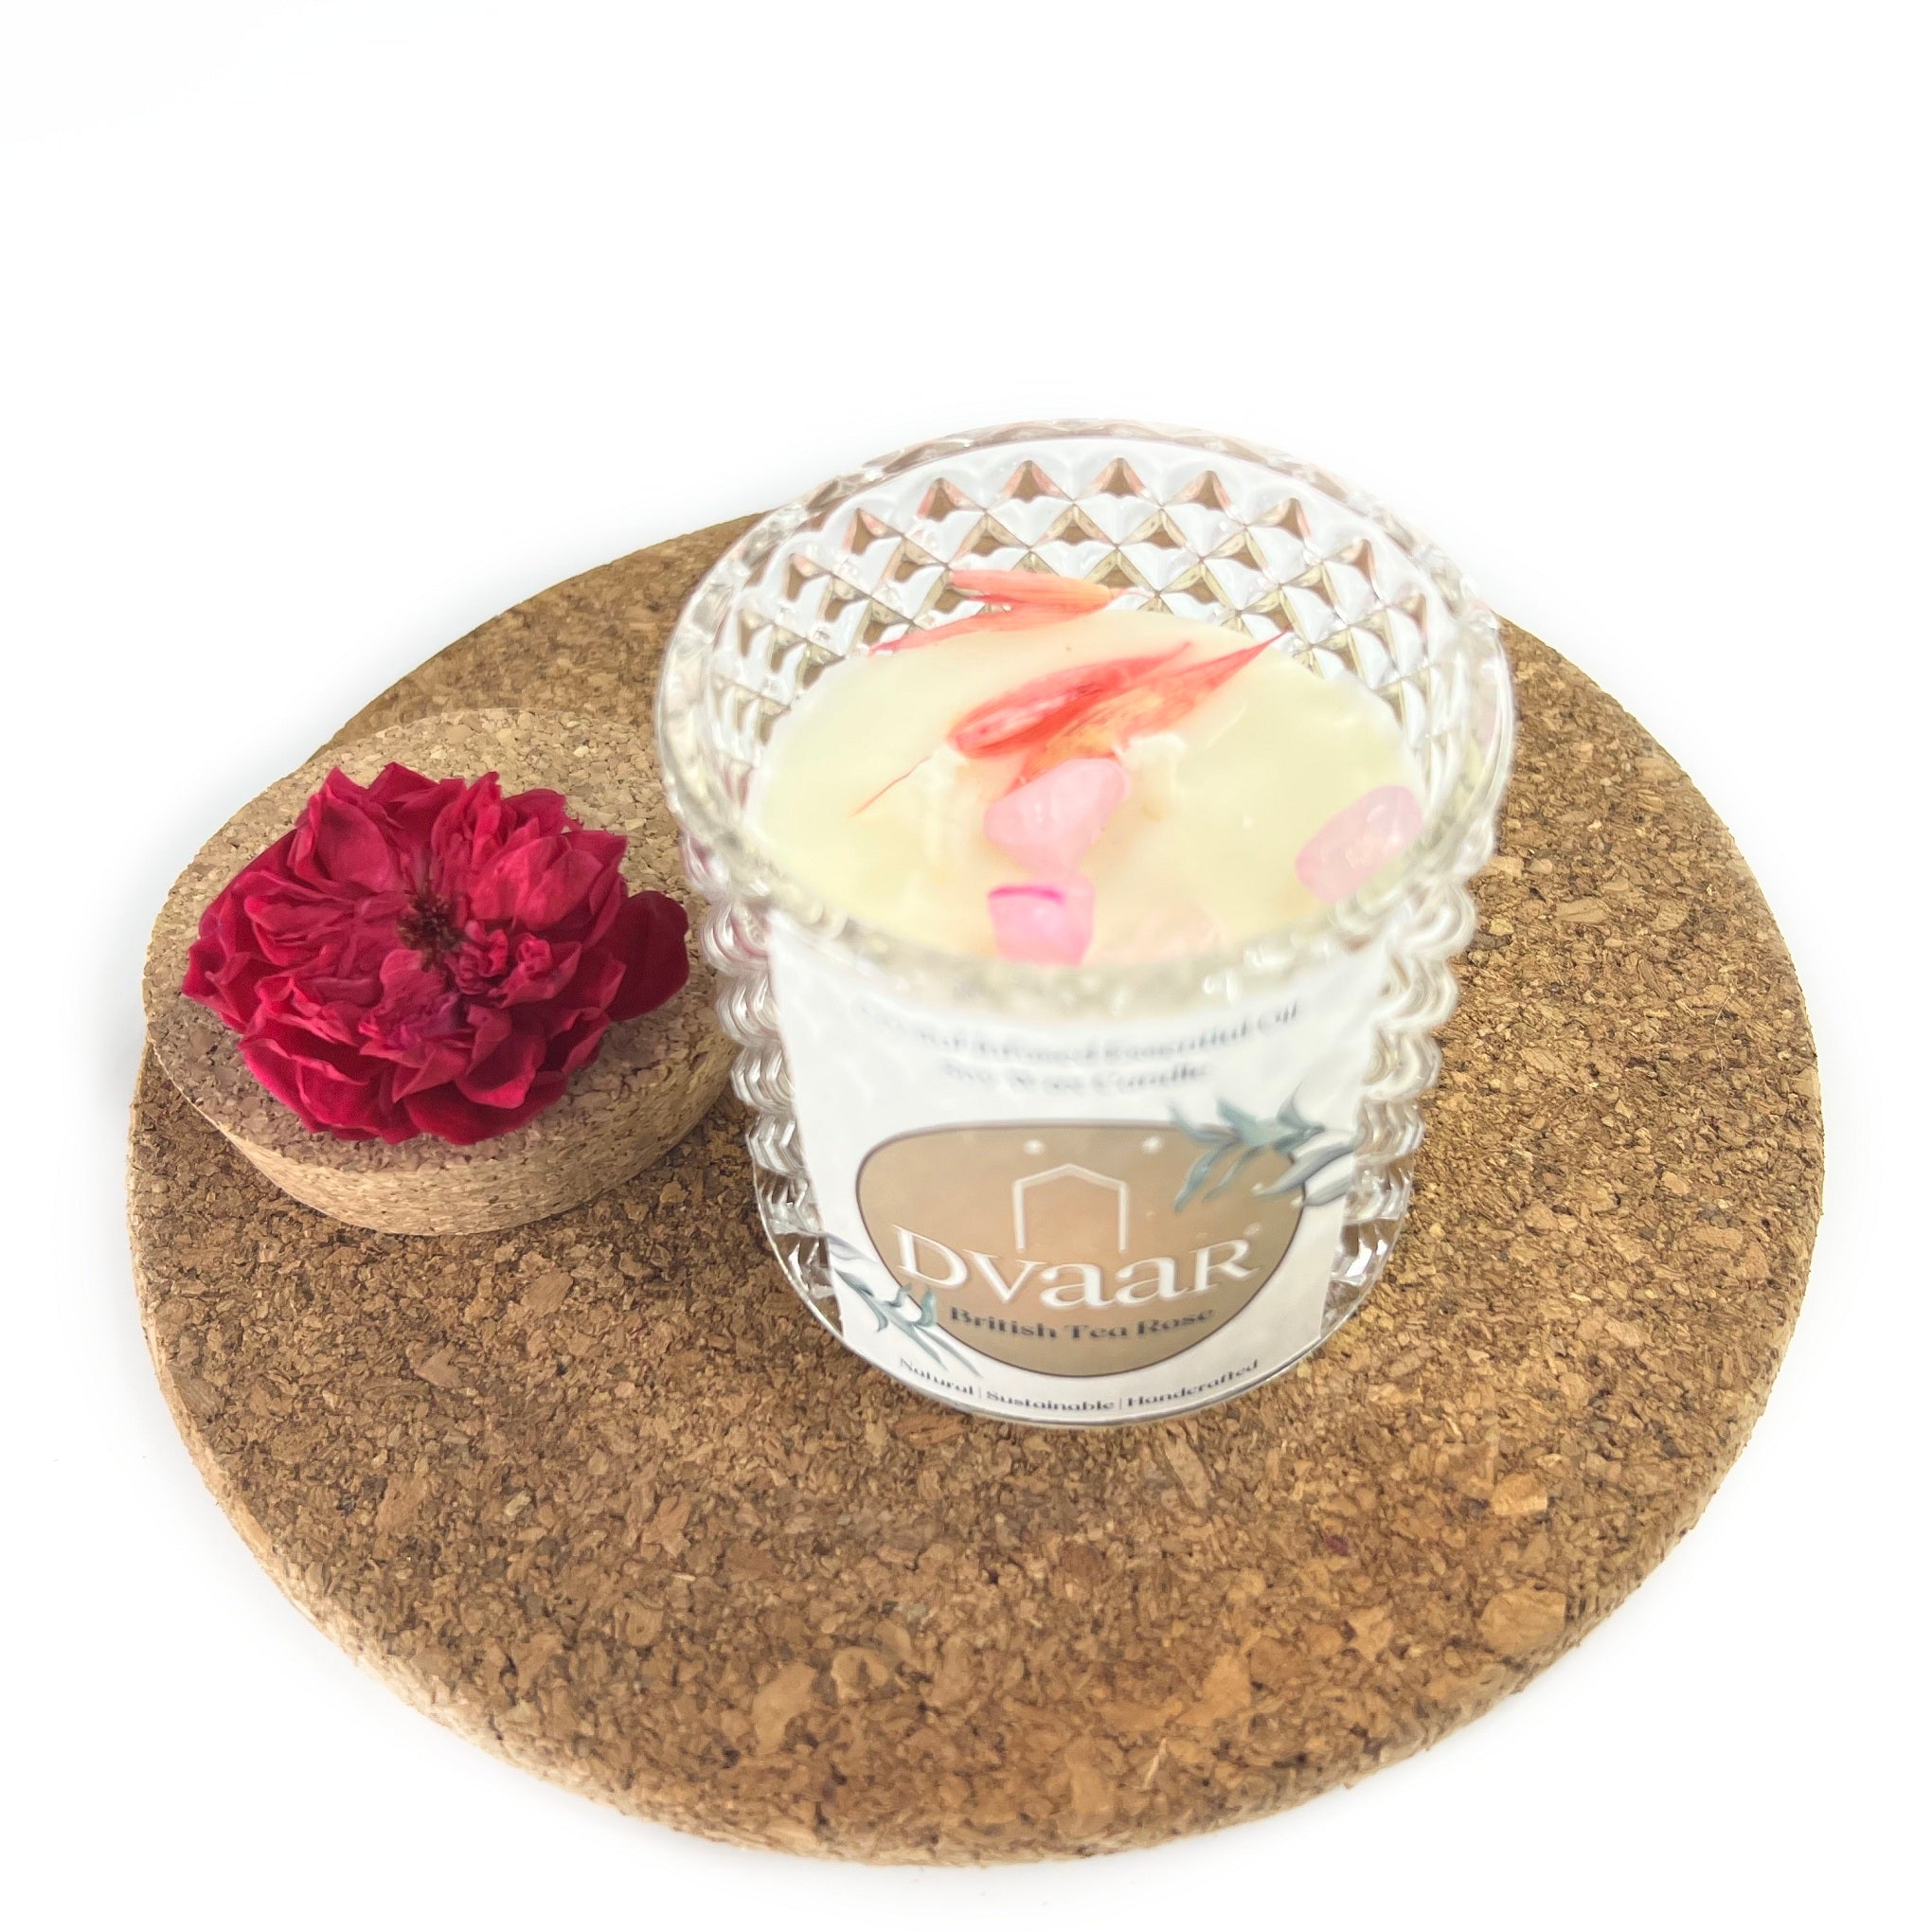 DVAAR SOYA WAX CANDLES SCENTED AROMATHERAPY MEDITATION HAND CRAFTED WITH NATURAL OILS CRYSTALS with GLASS JAR 280 GMS. FRAGRANCE-British Tea Rose